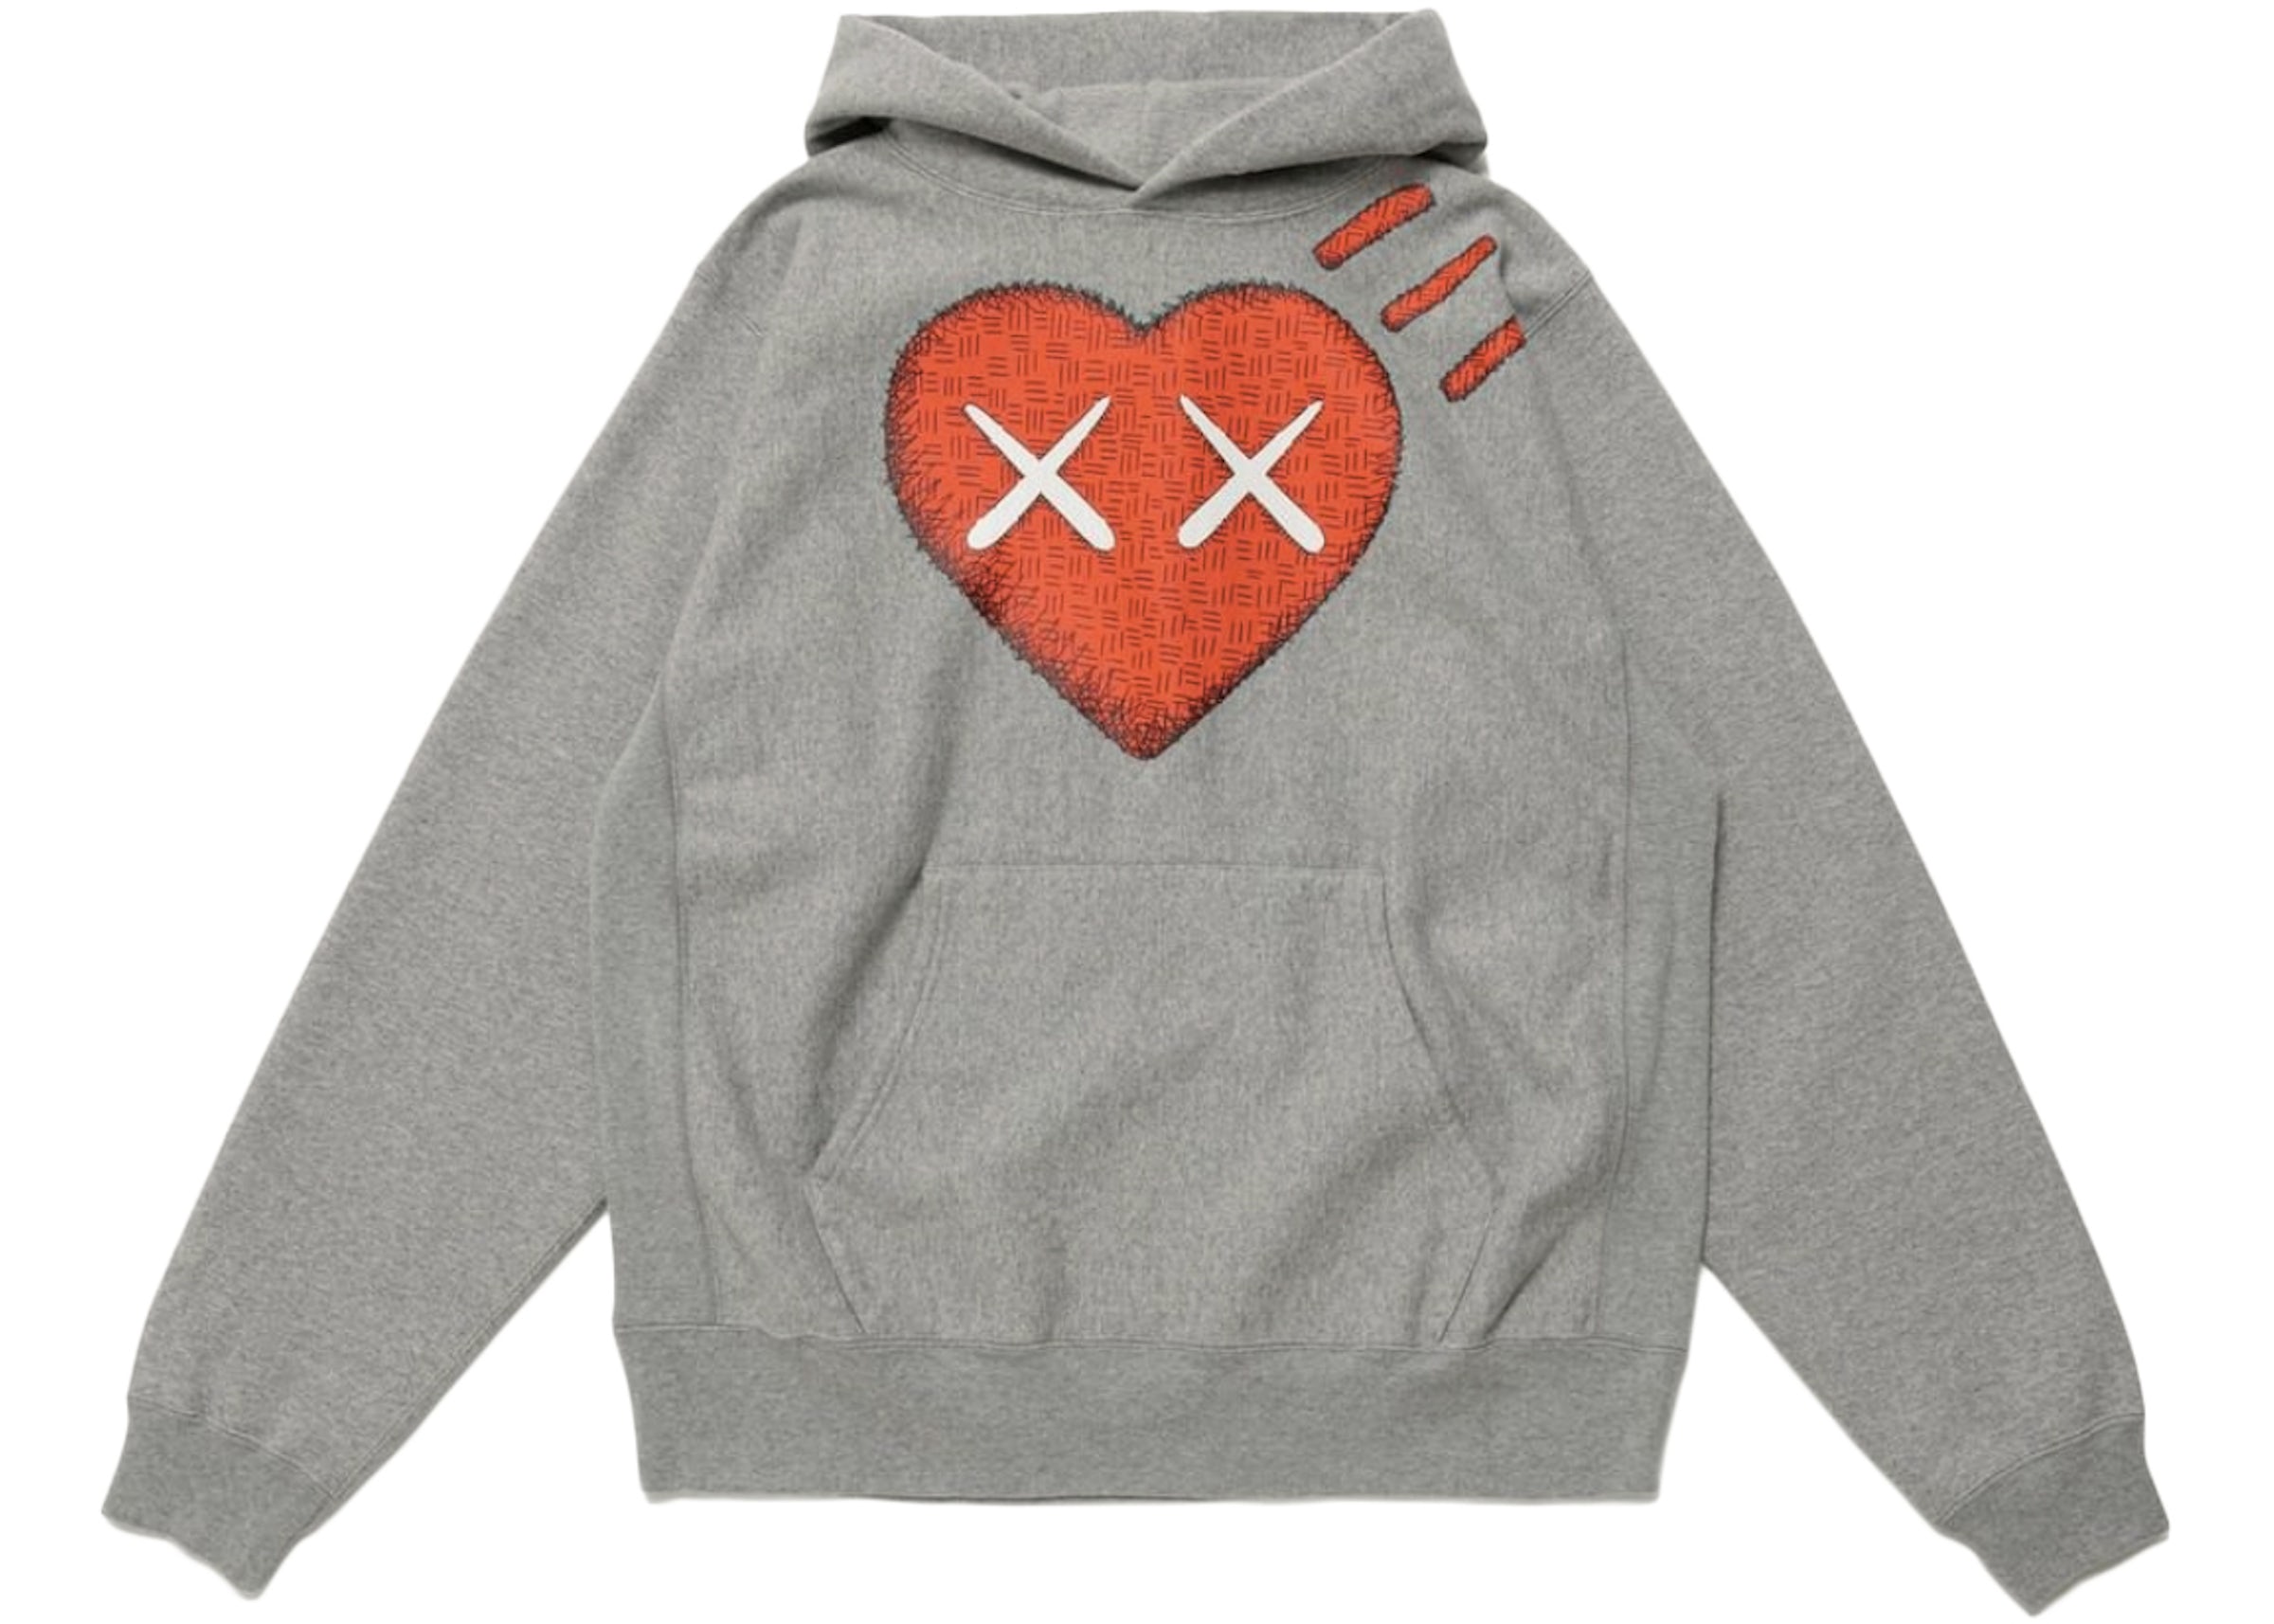 A variety of Kaws hoodies in different colors and designs